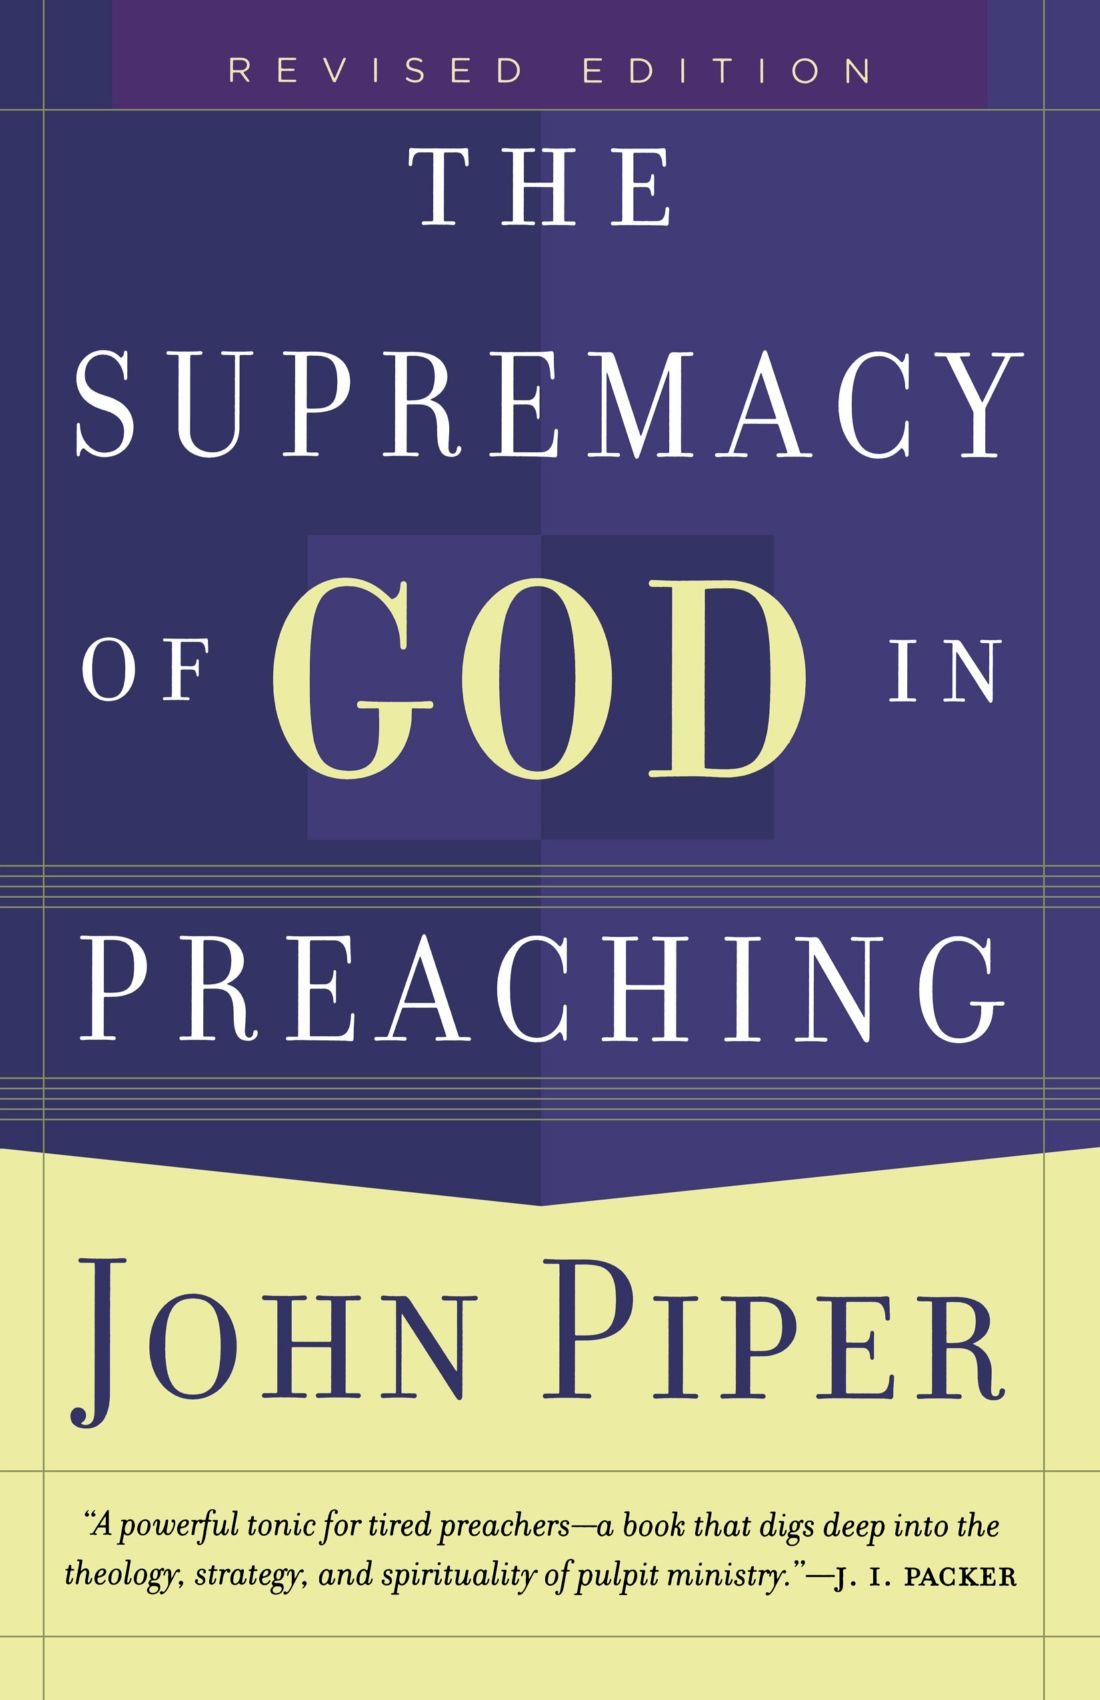 The supremacy of God in preaching